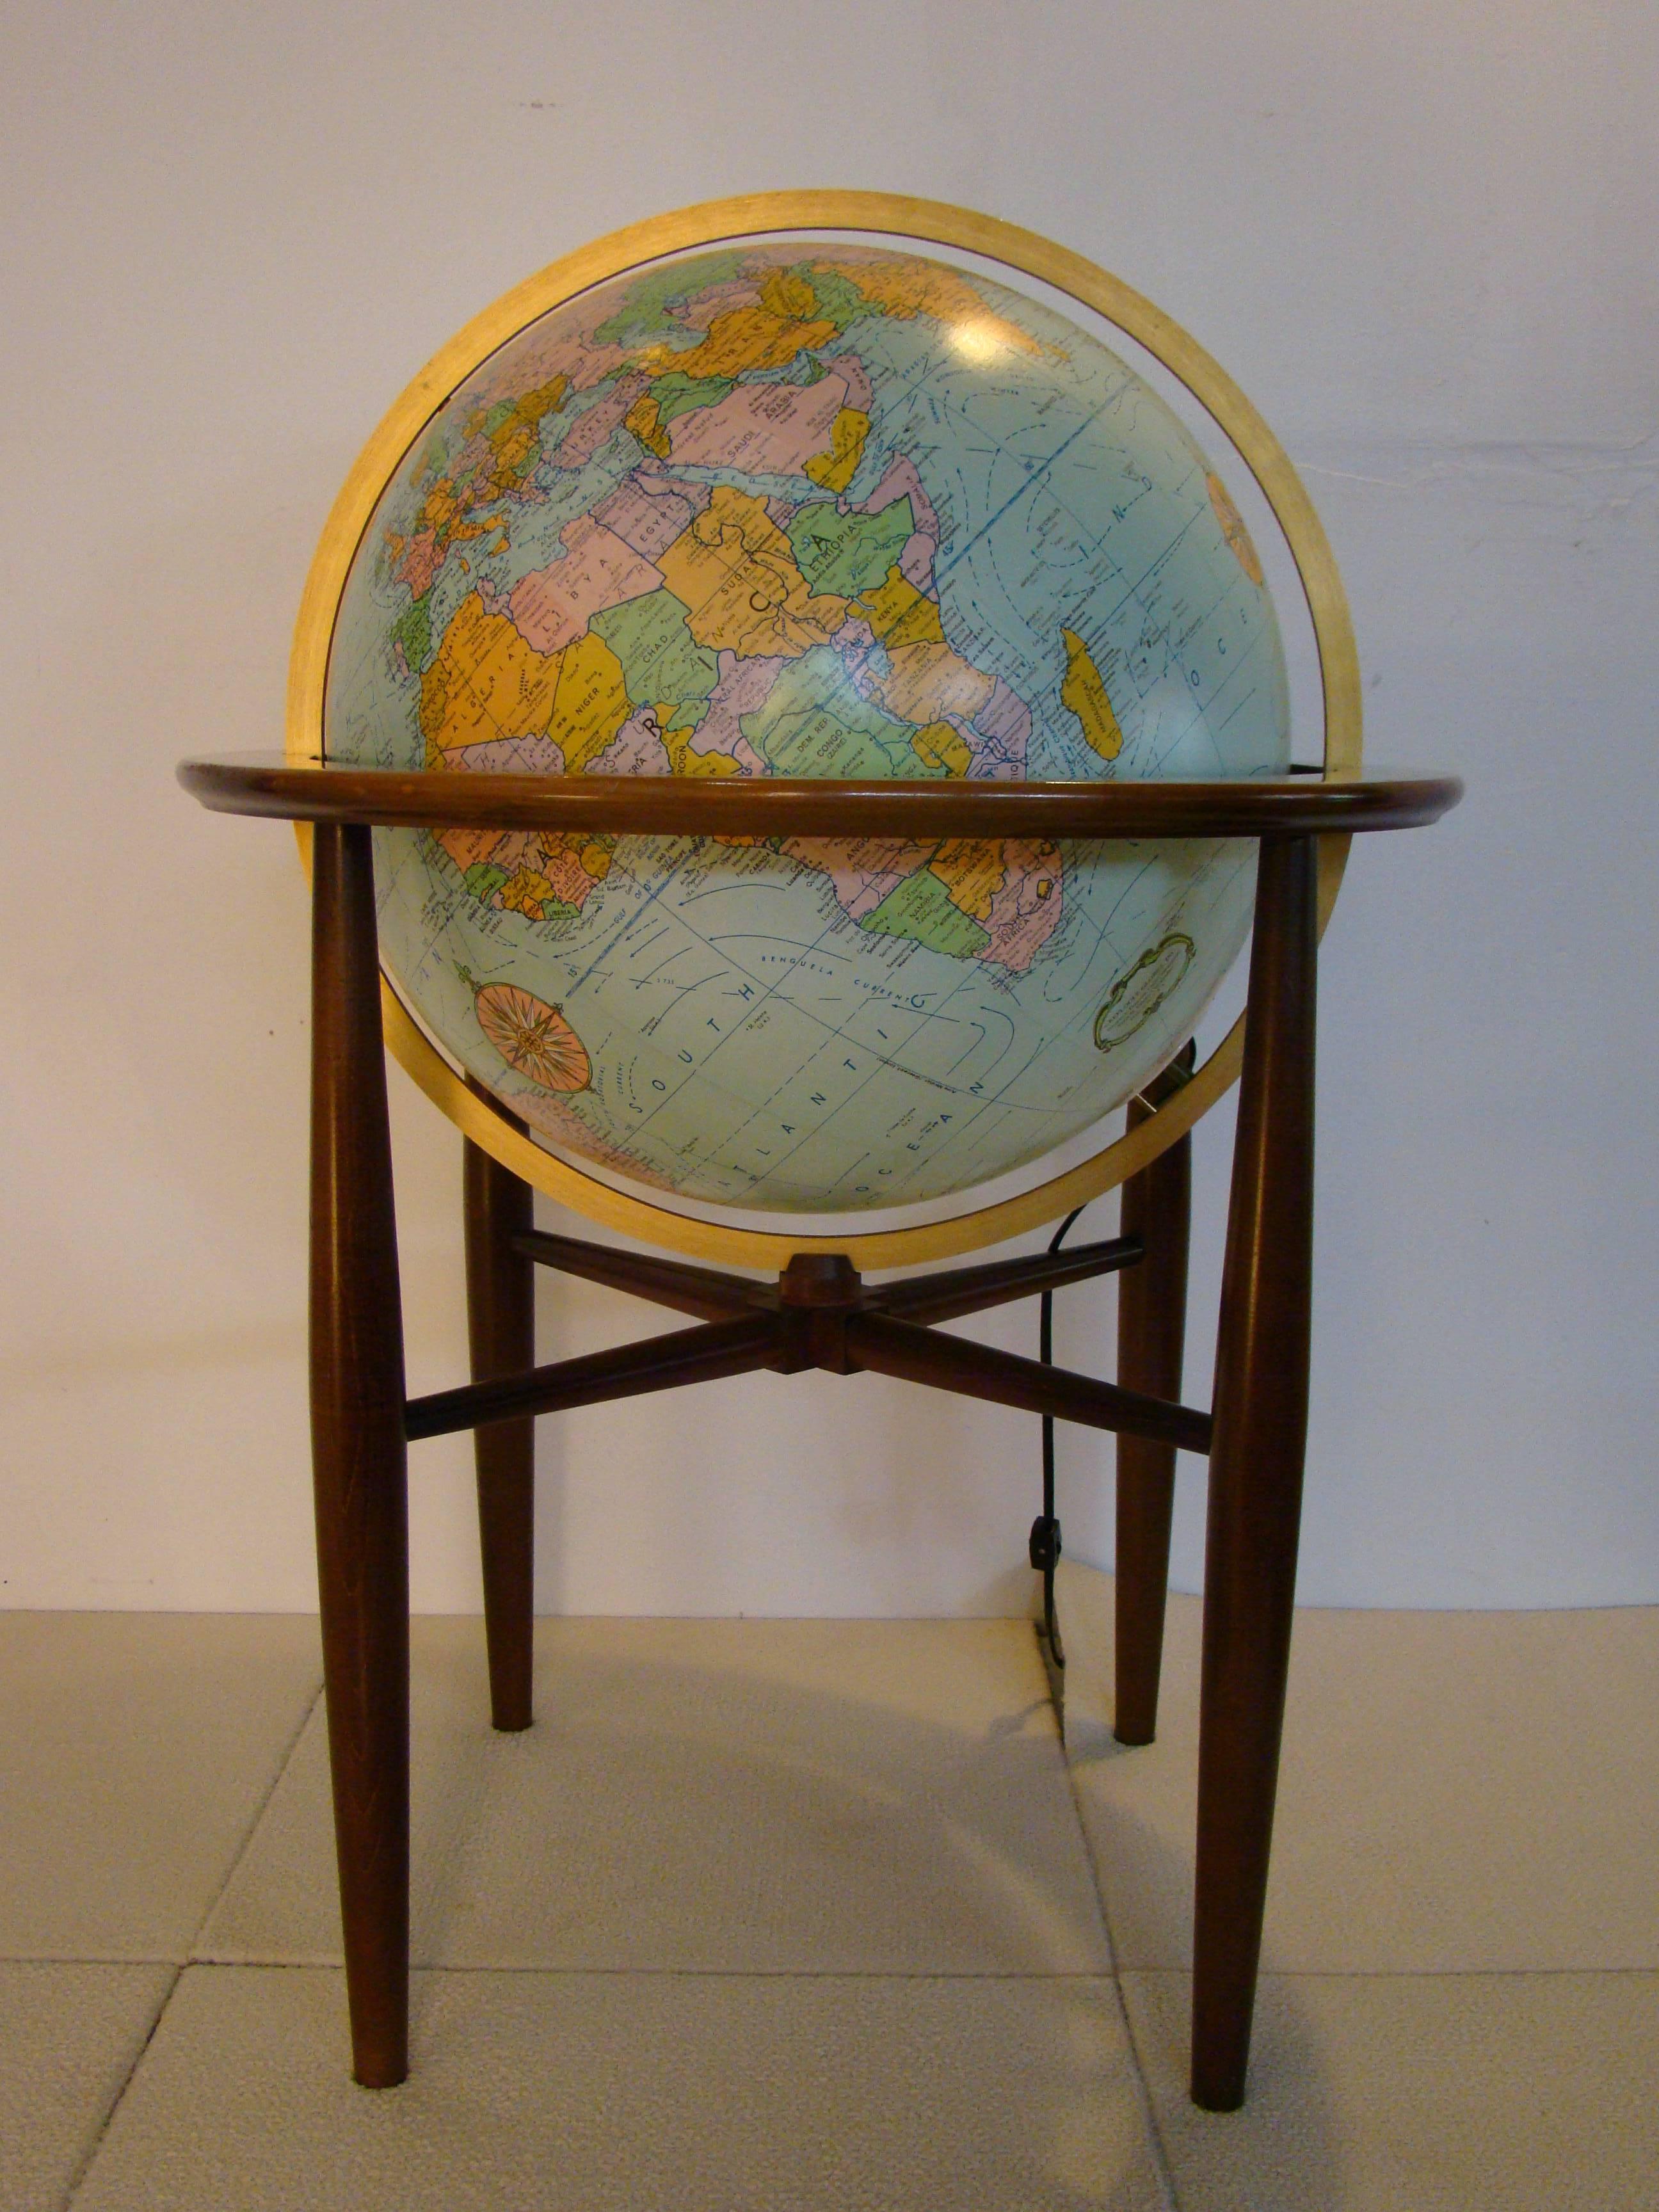 Stunning monumental illuminated world globe on walnut stand by Replogle, circa 1960s. Excellent for an additional light source.